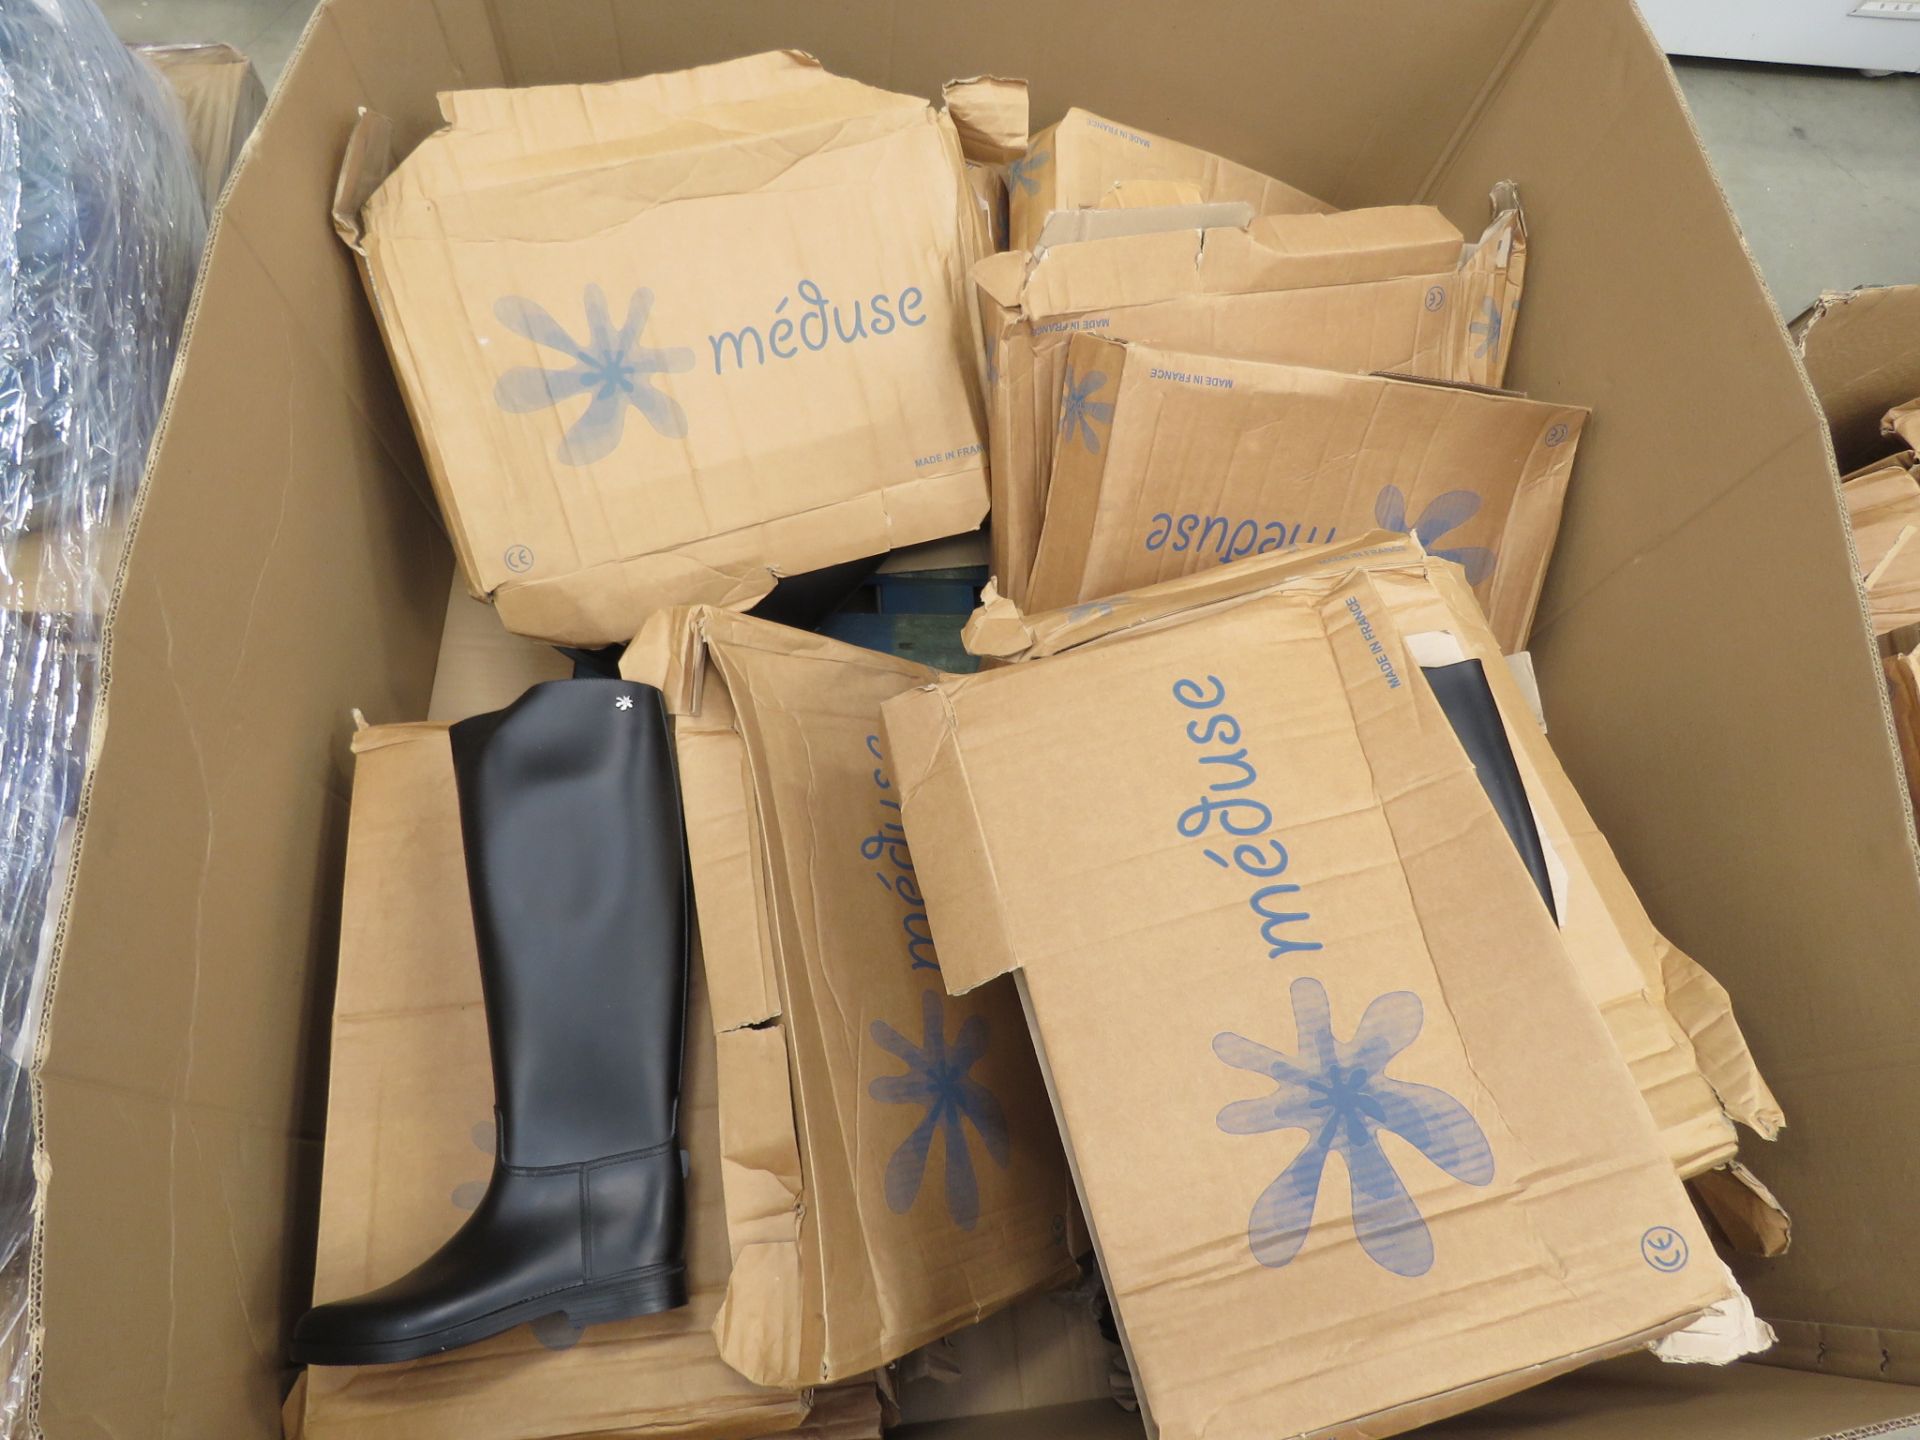 Pallet of Medese Wellingtons size 37 and 36 (UK 4 and 3.5), 18 pairs